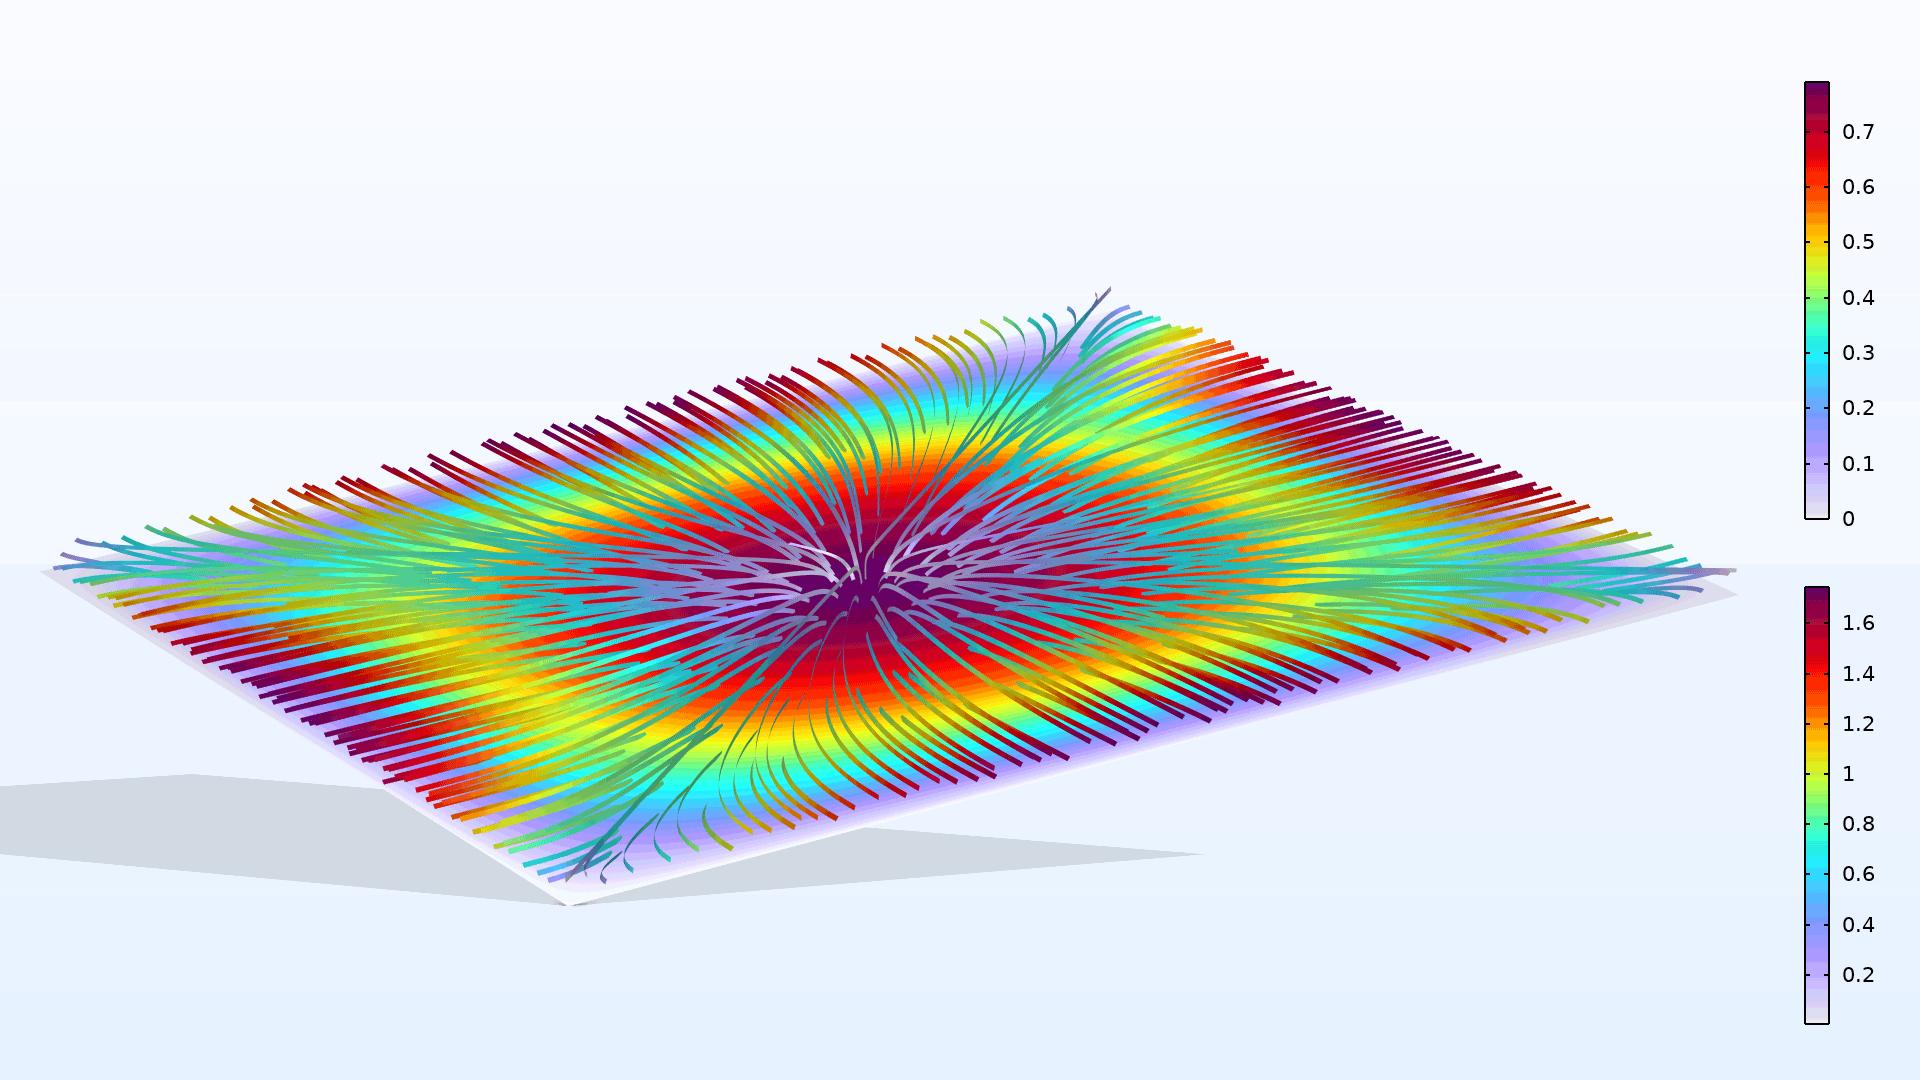 A rectangular plate model showing the flow in Prism colored streamlines.